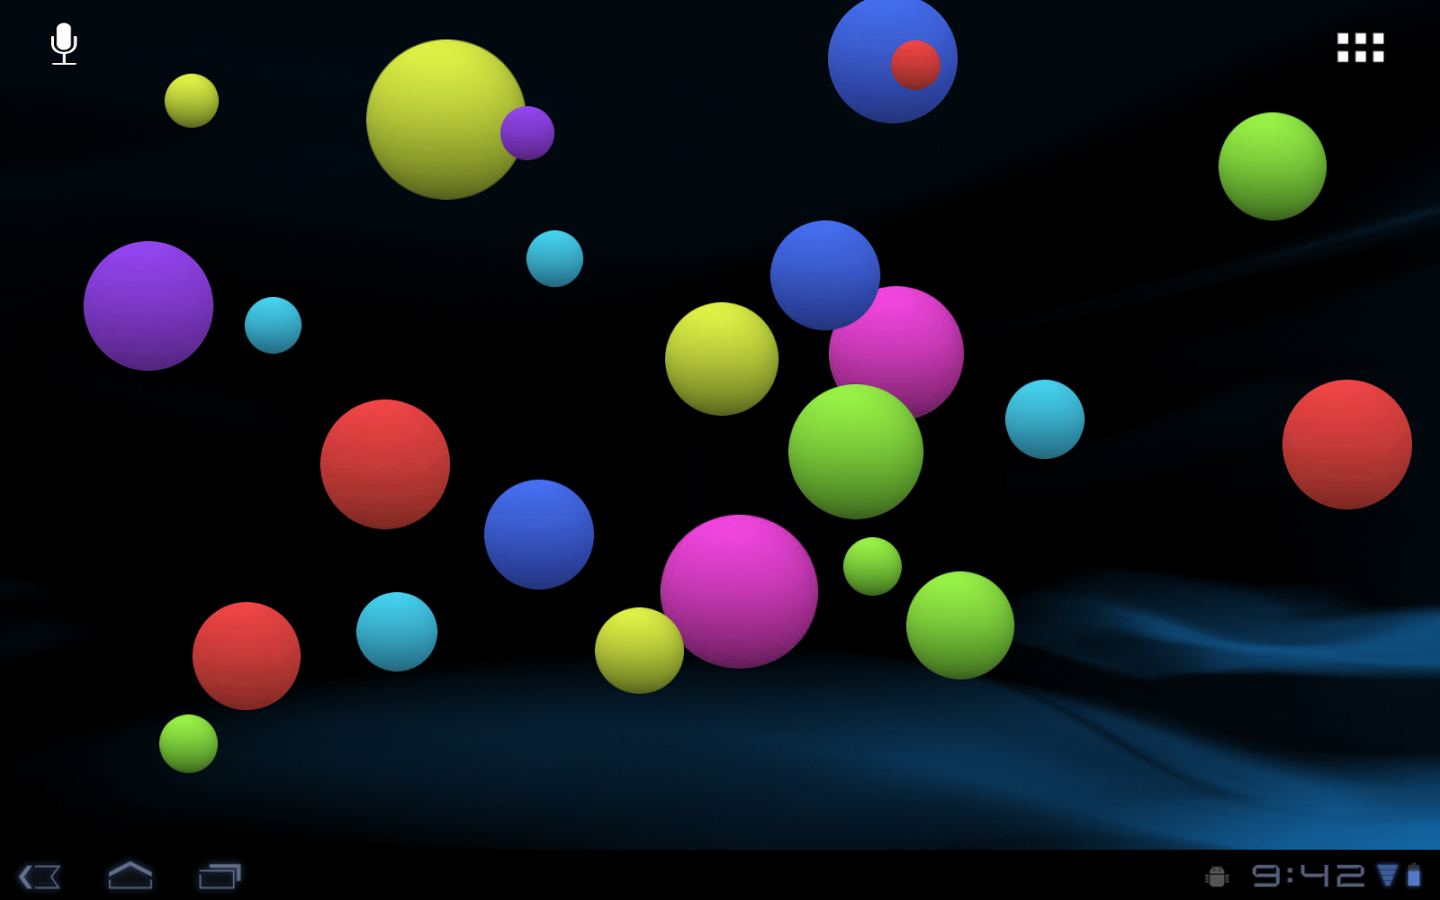 colorful bubble hd is a colored live wallpaper whith moving bubbles